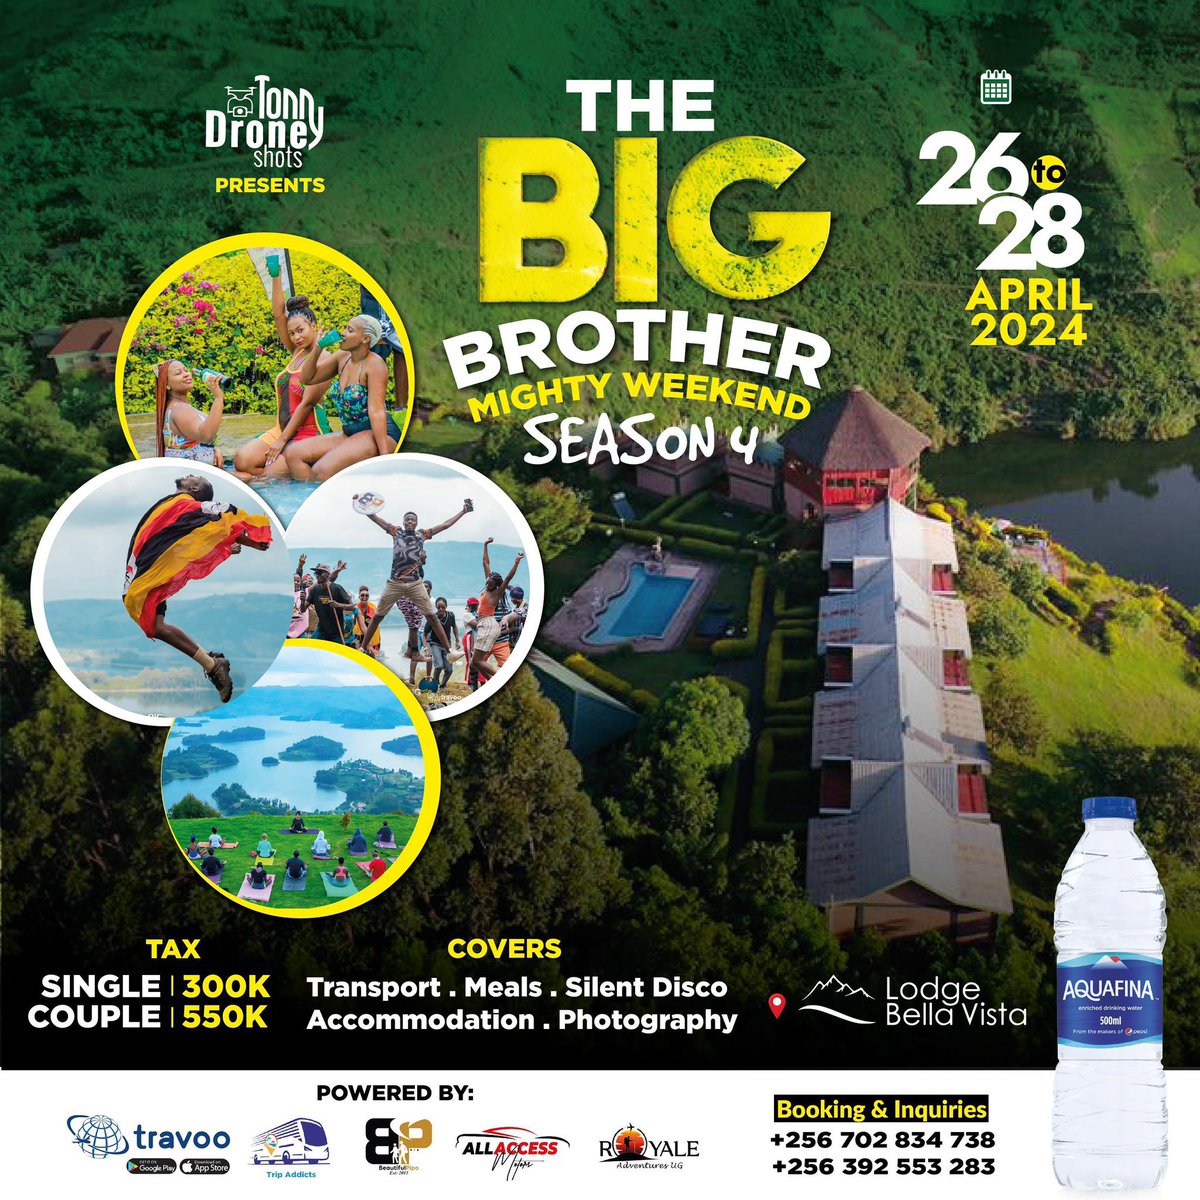 The Big Brother Mighty Weekend is back at Lodge BellaVista in Fortportal. It’s time to hit the road again. #BBS4 🤭🔥 Who wants to be our travel partner? 🌝